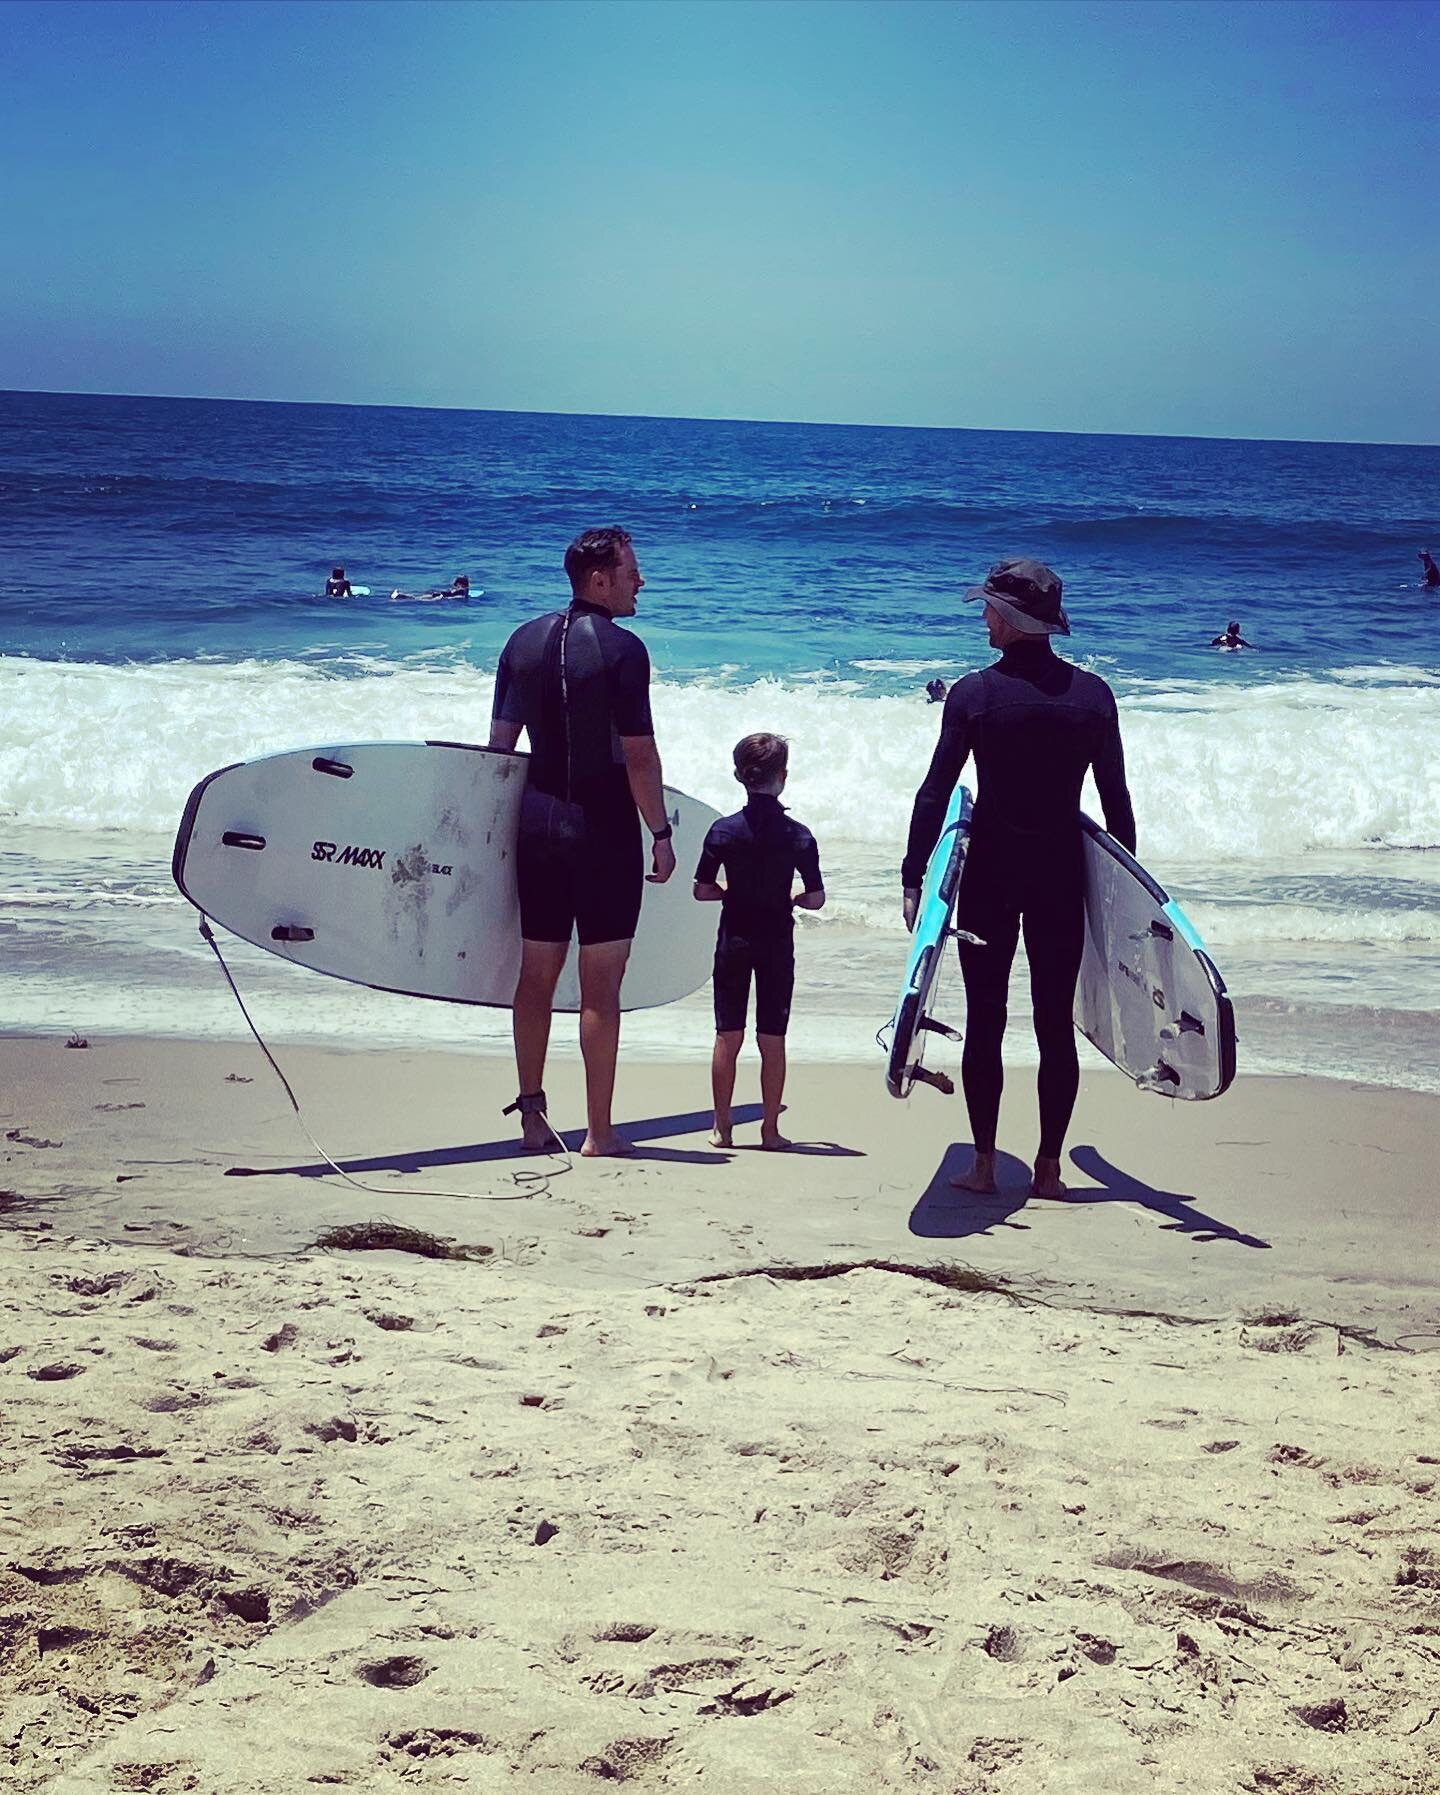 Happy Father&rsquo;s Day to all the dads out there keeping the groms stoked!
Father and son session with Harrison and Gavin sharing some quality water time together.
@surfnsport82 @movandewall 
@slidawg_surfcamp 
#surflessons #lagunabeachsurf #surfla